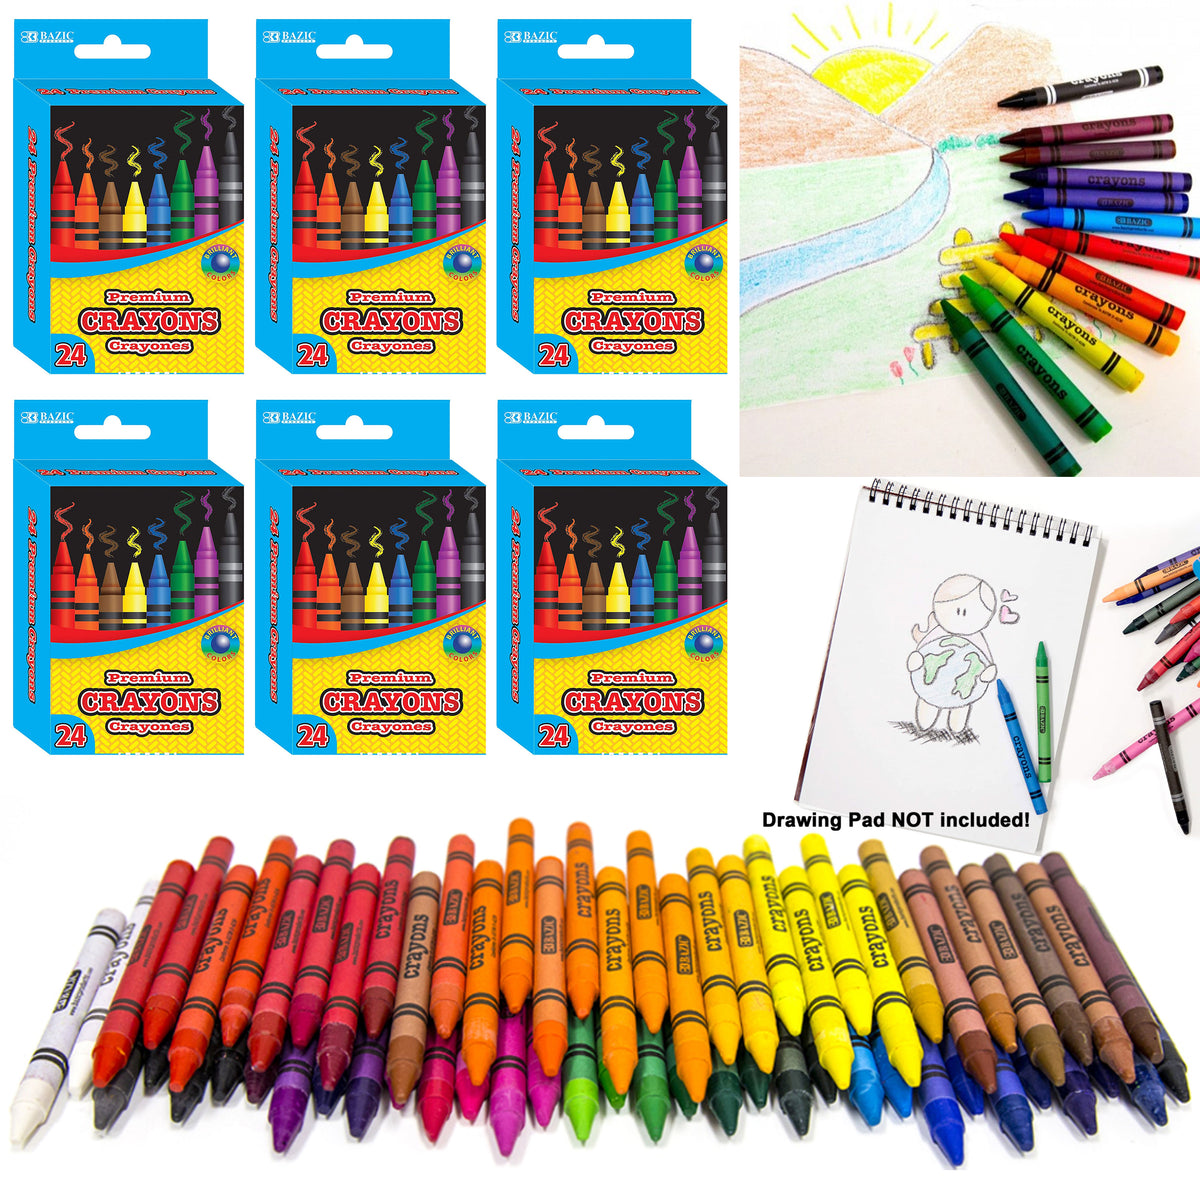 144 High Quality Crayons Premium Colors Coloring Non Toxic School Kids Art Craft